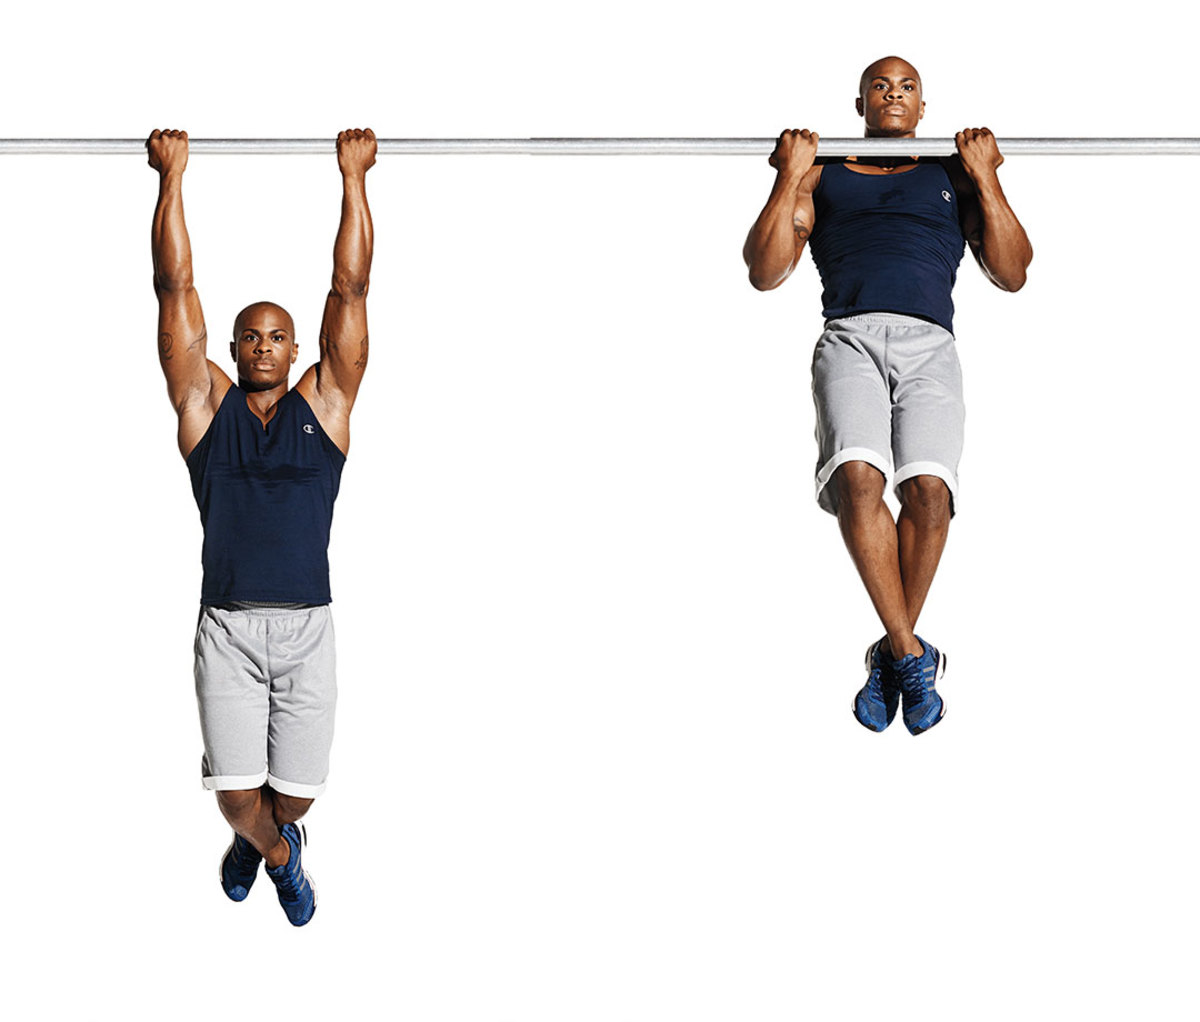 L-SIT PULL UPS  Why The L-sit Makes Pull-ups Harder and Improves